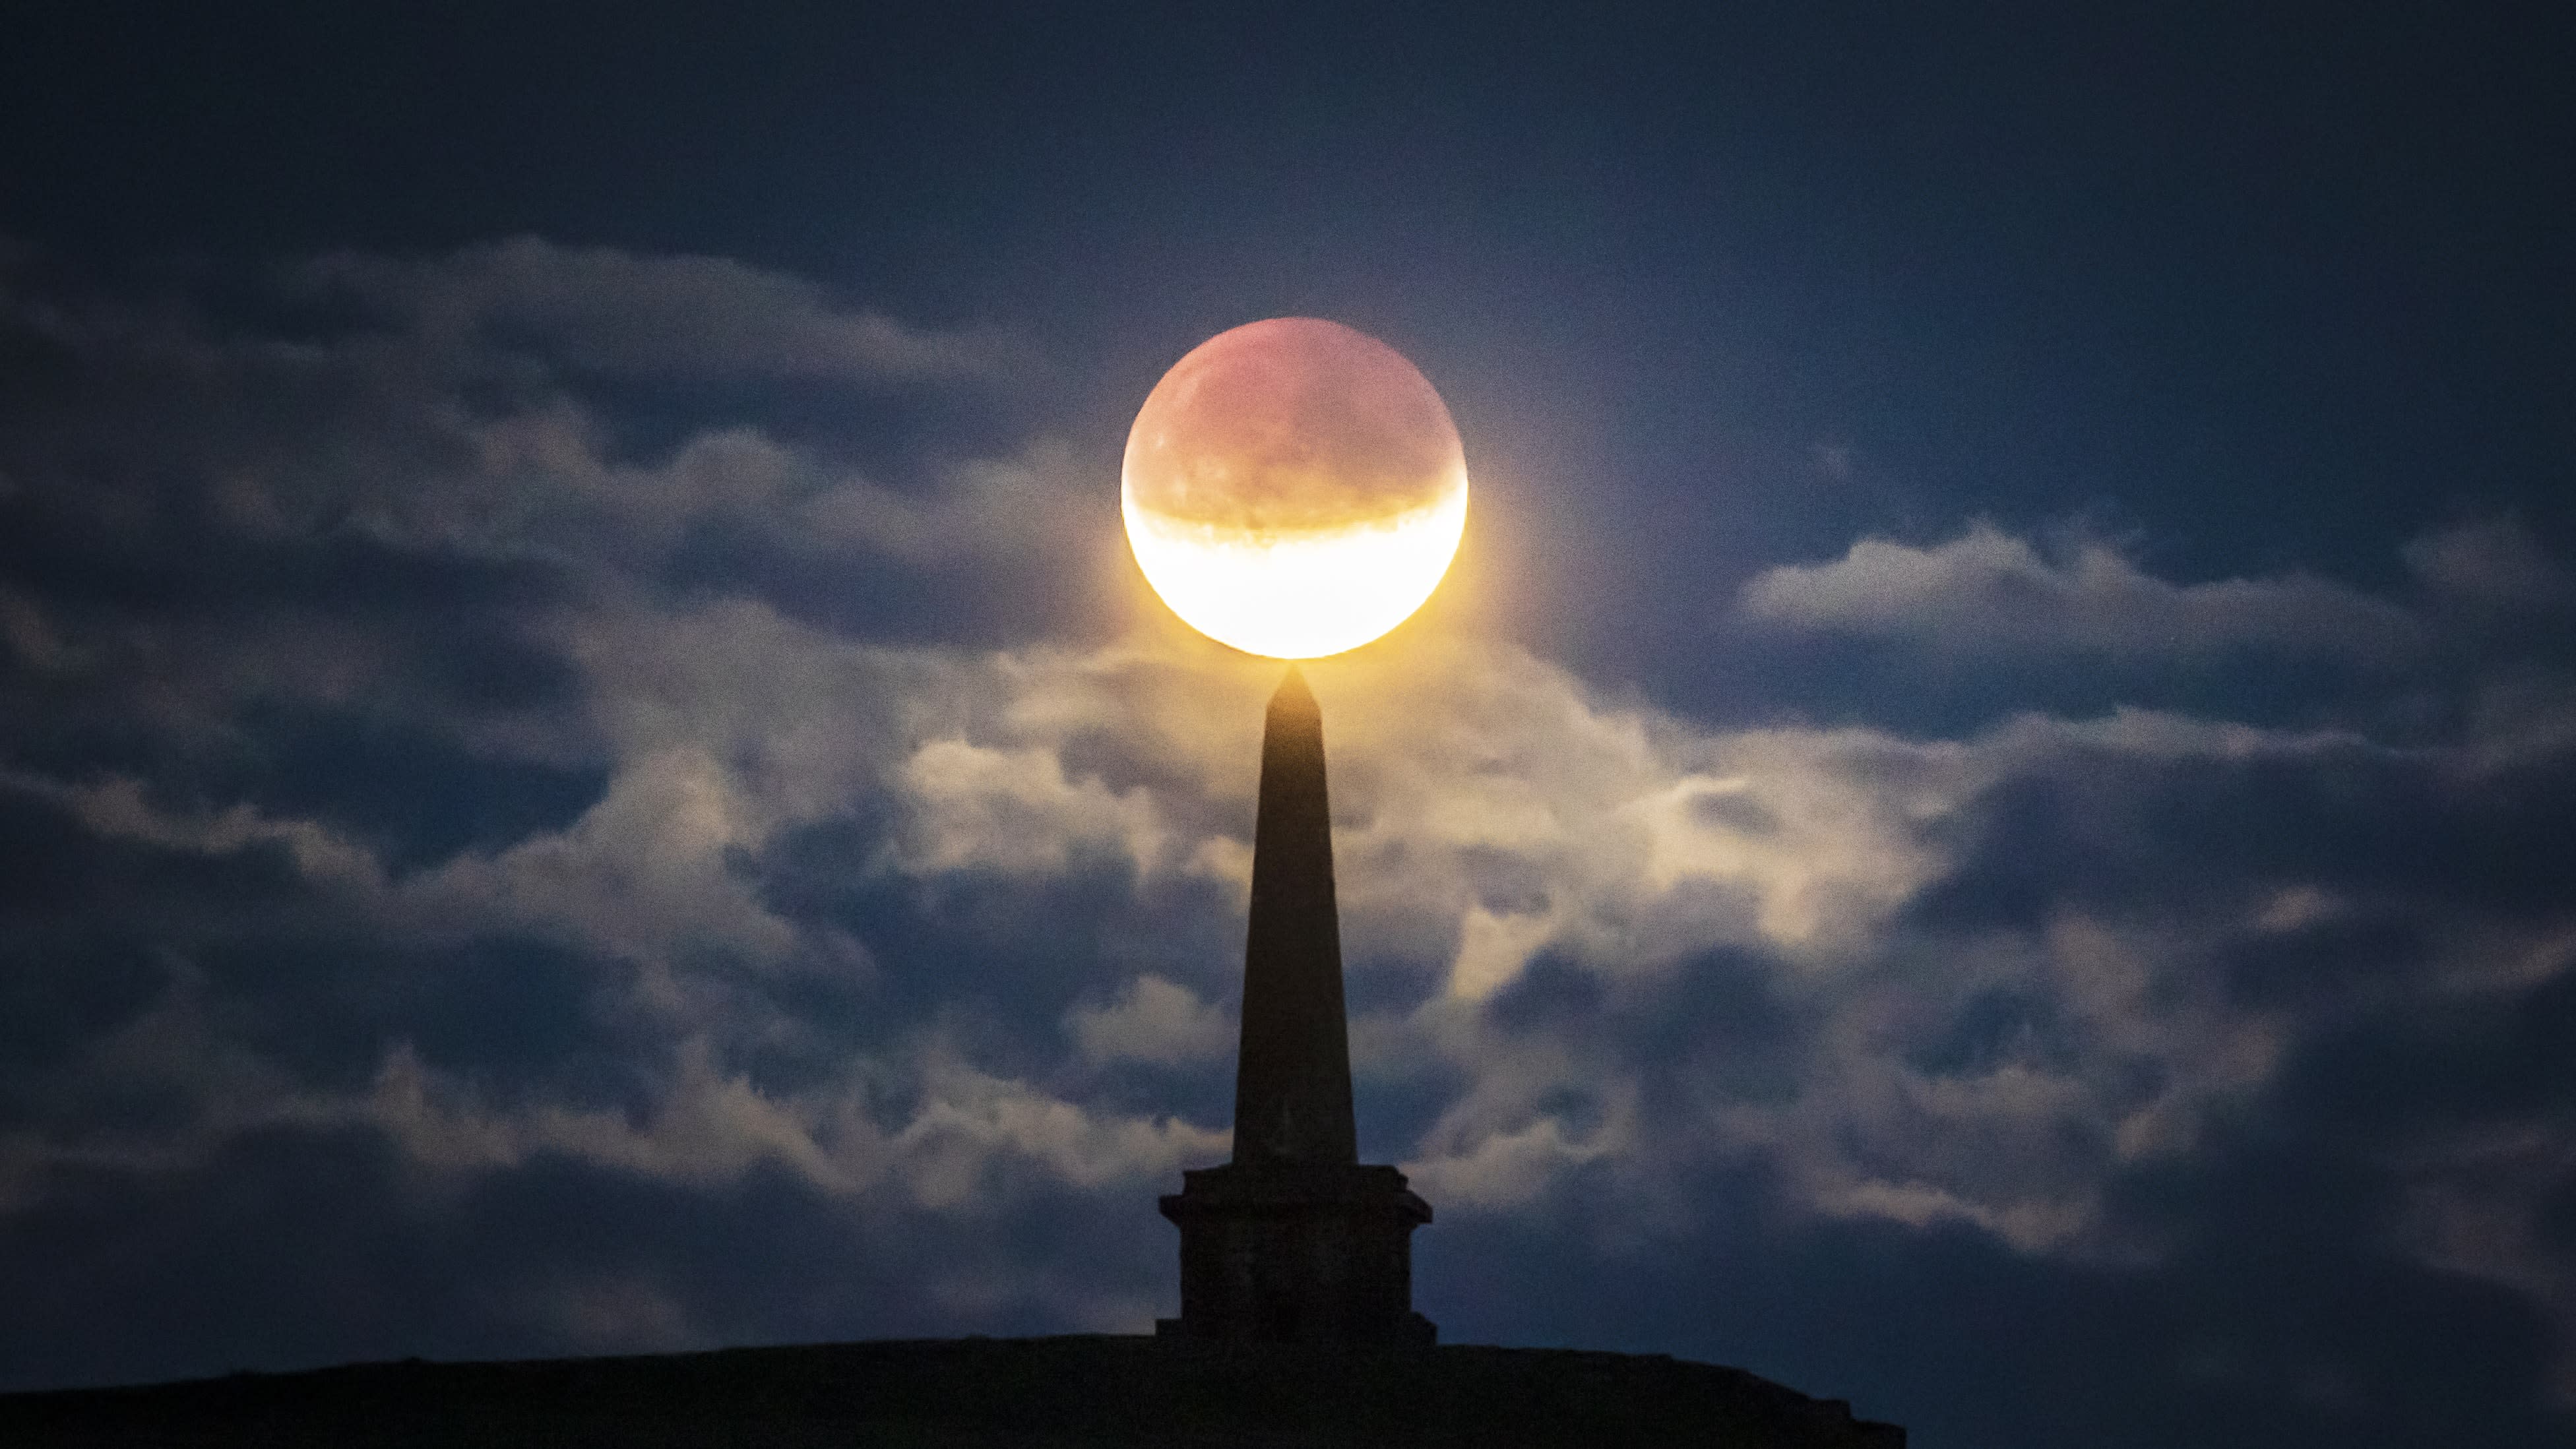 In Pictures Partial lunar eclipse celebrated across the world